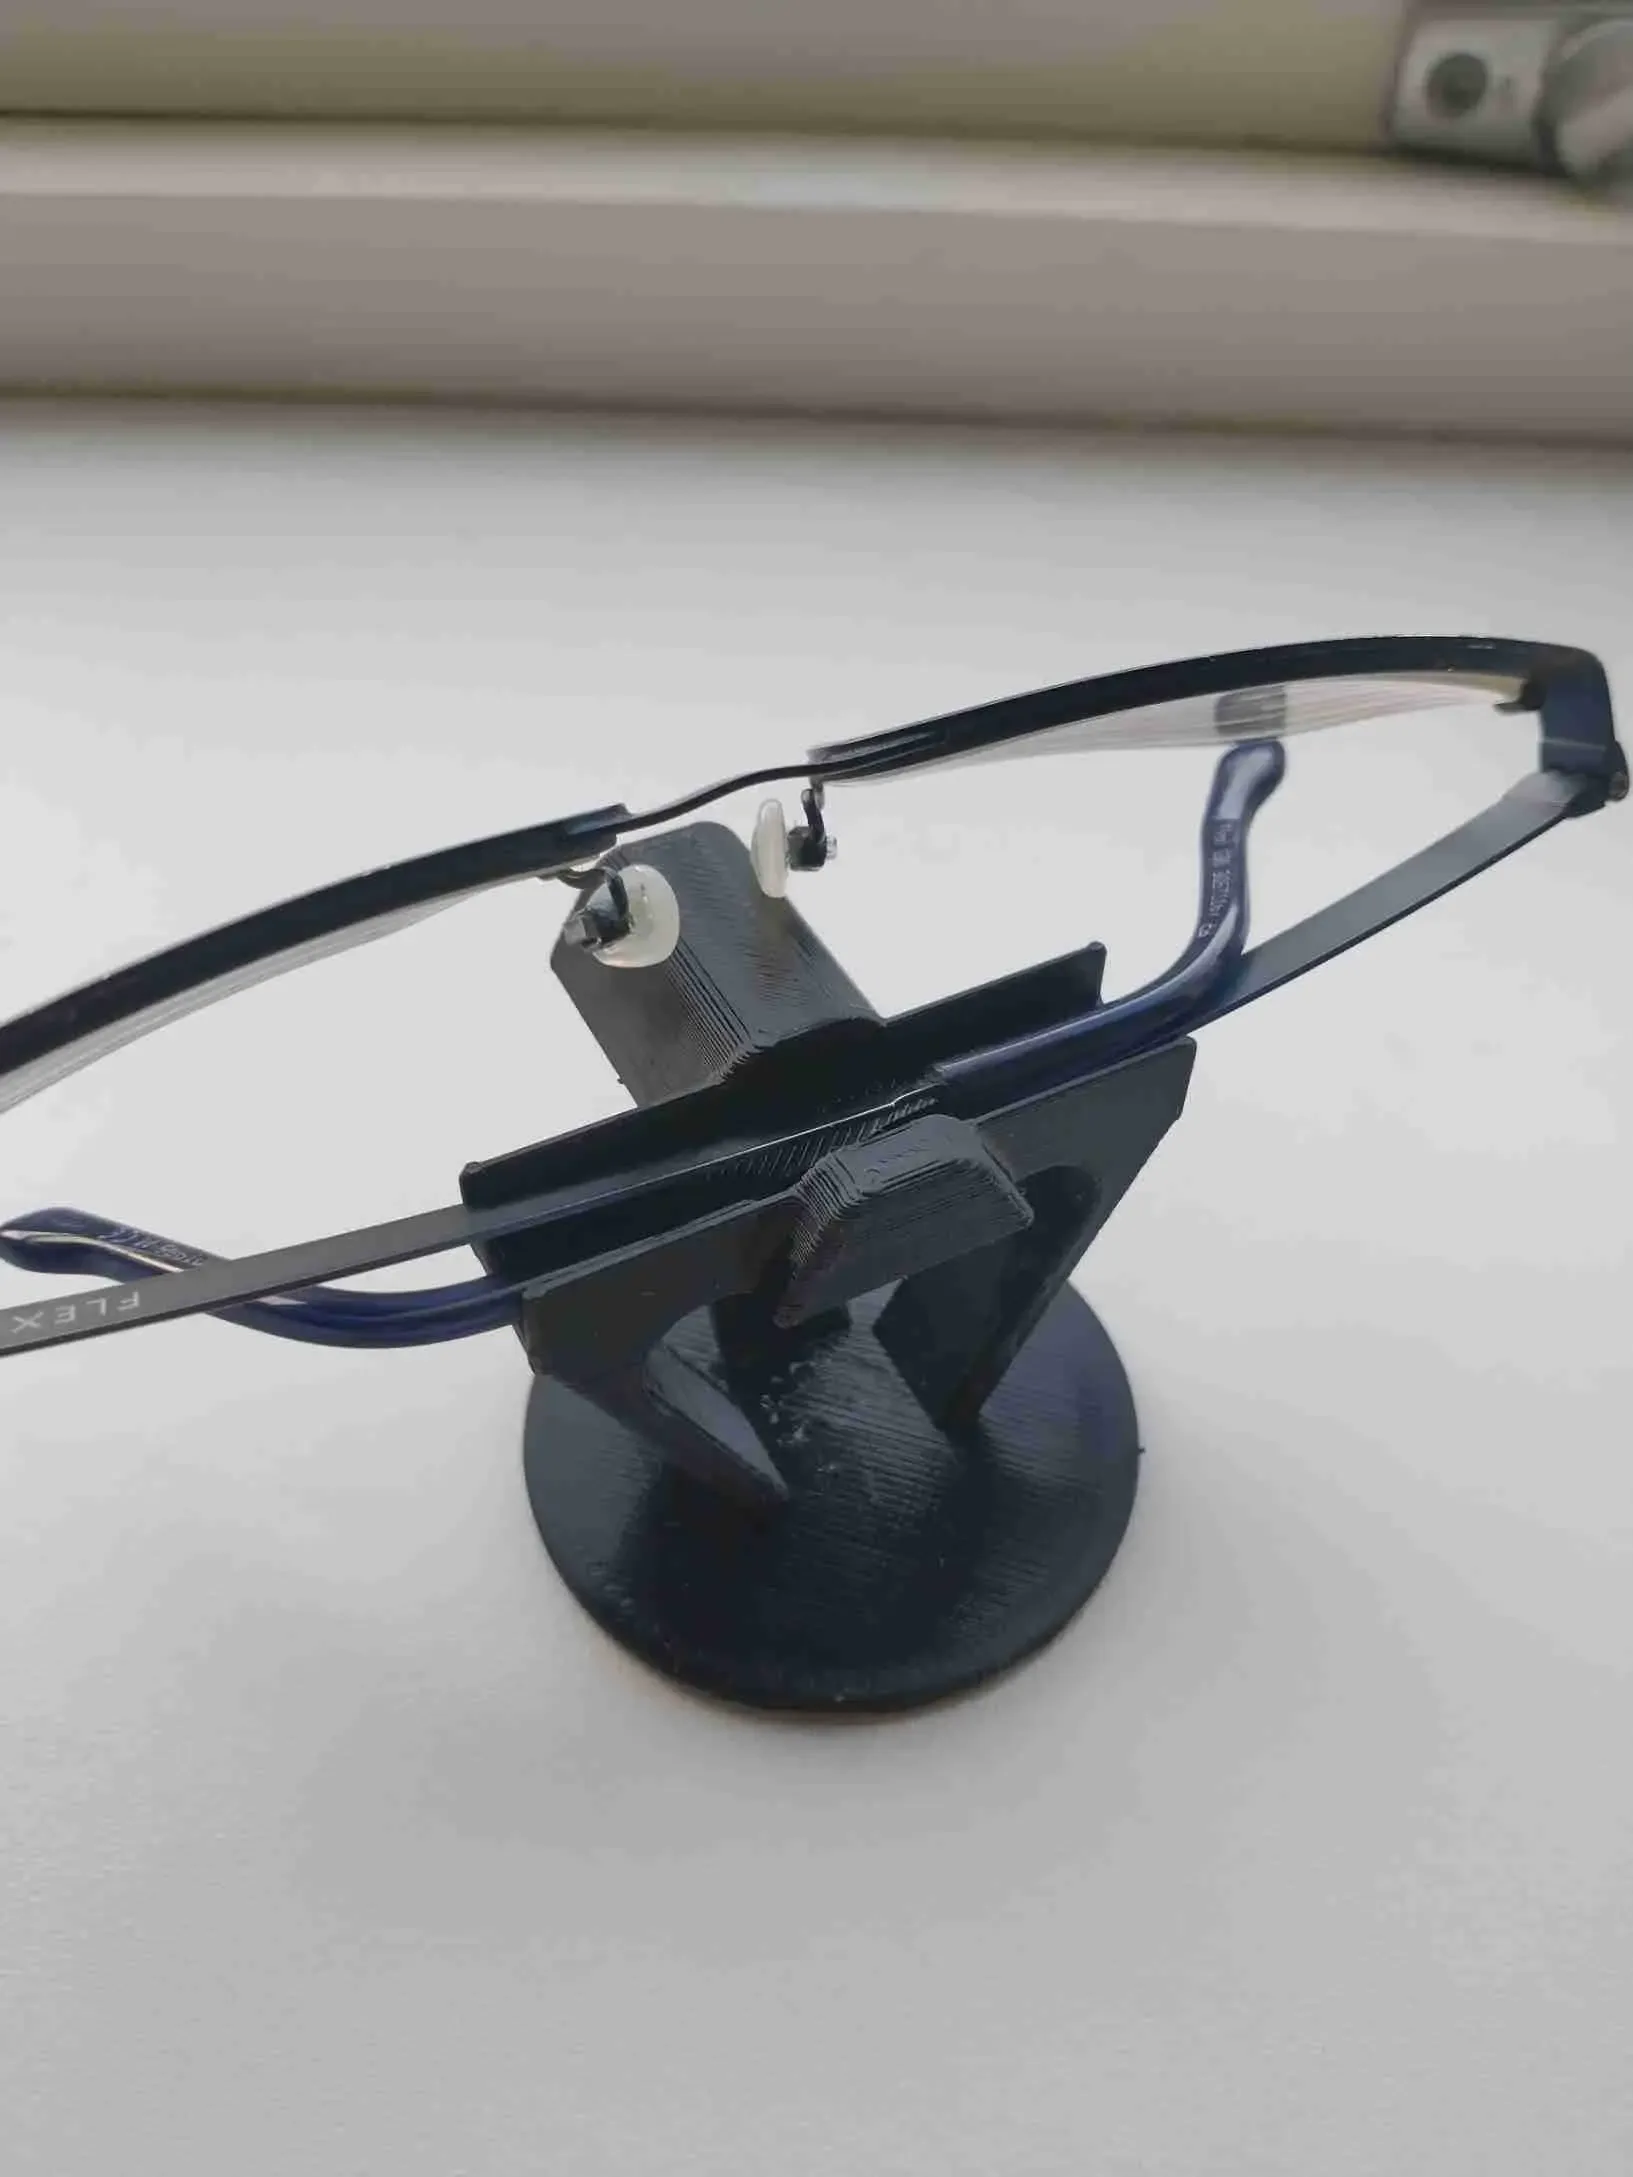 Simple and clean holder for your glasses.